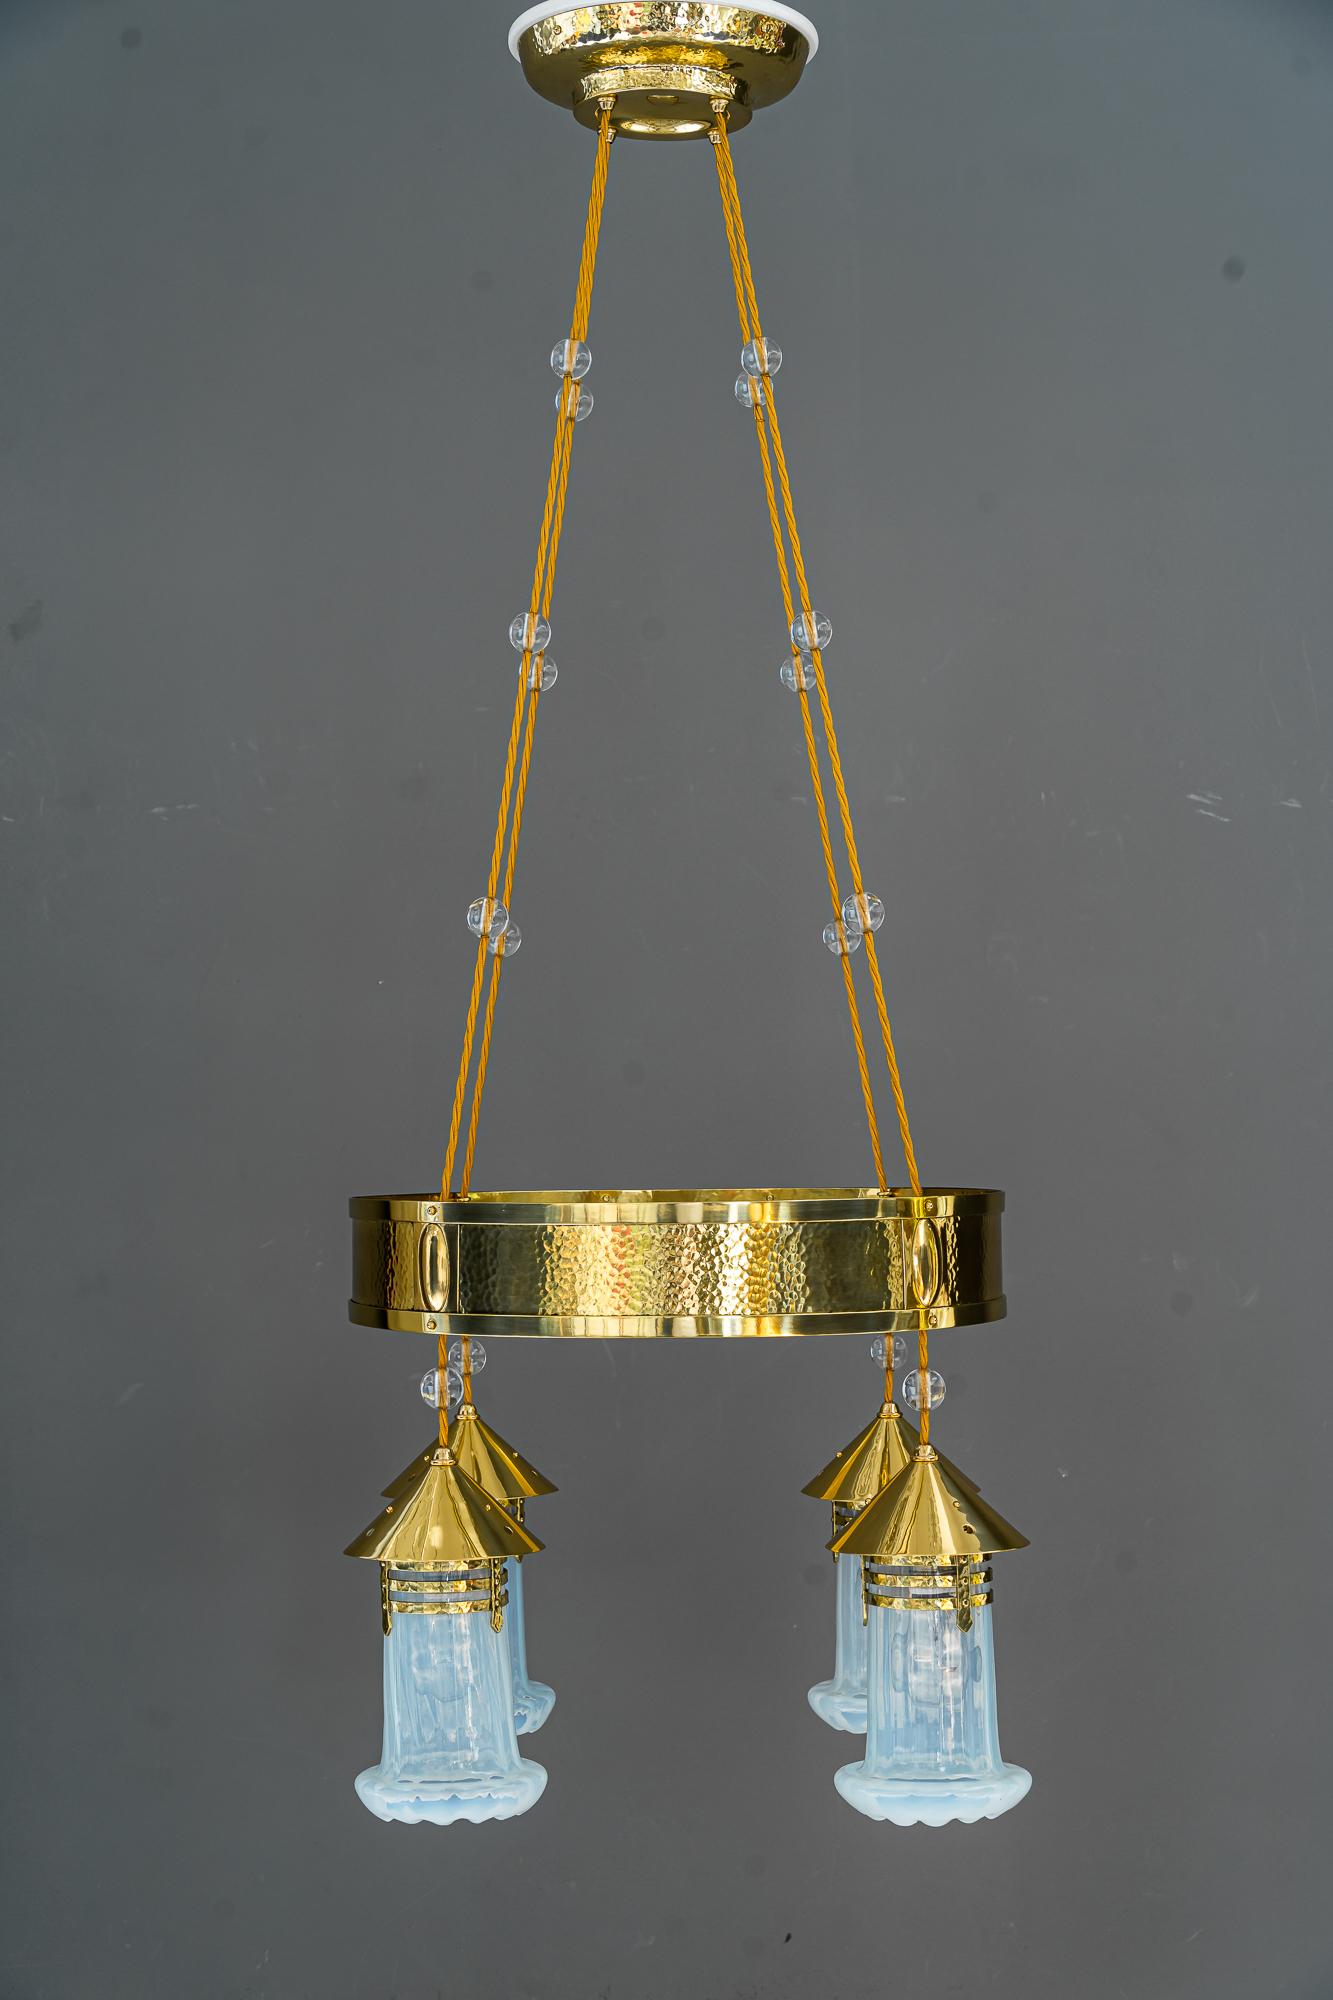 Lacquered Hammered Art Deco Chandelier with Opaline Glass Shades, Vienna, Around 1920 For Sale